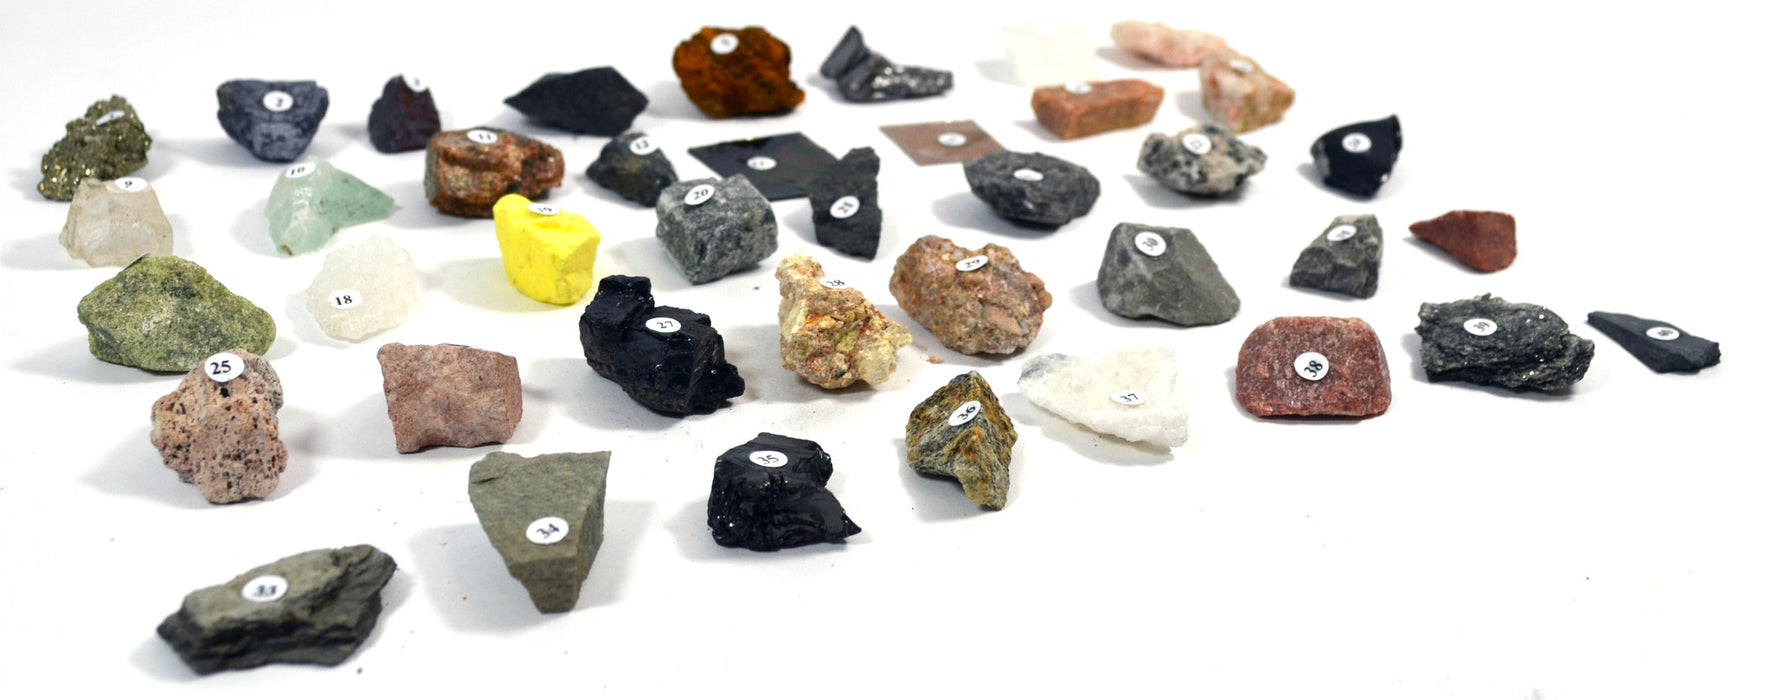 40 Piece Basic Rocks and Minerals Kit - Includes Mineral Samples